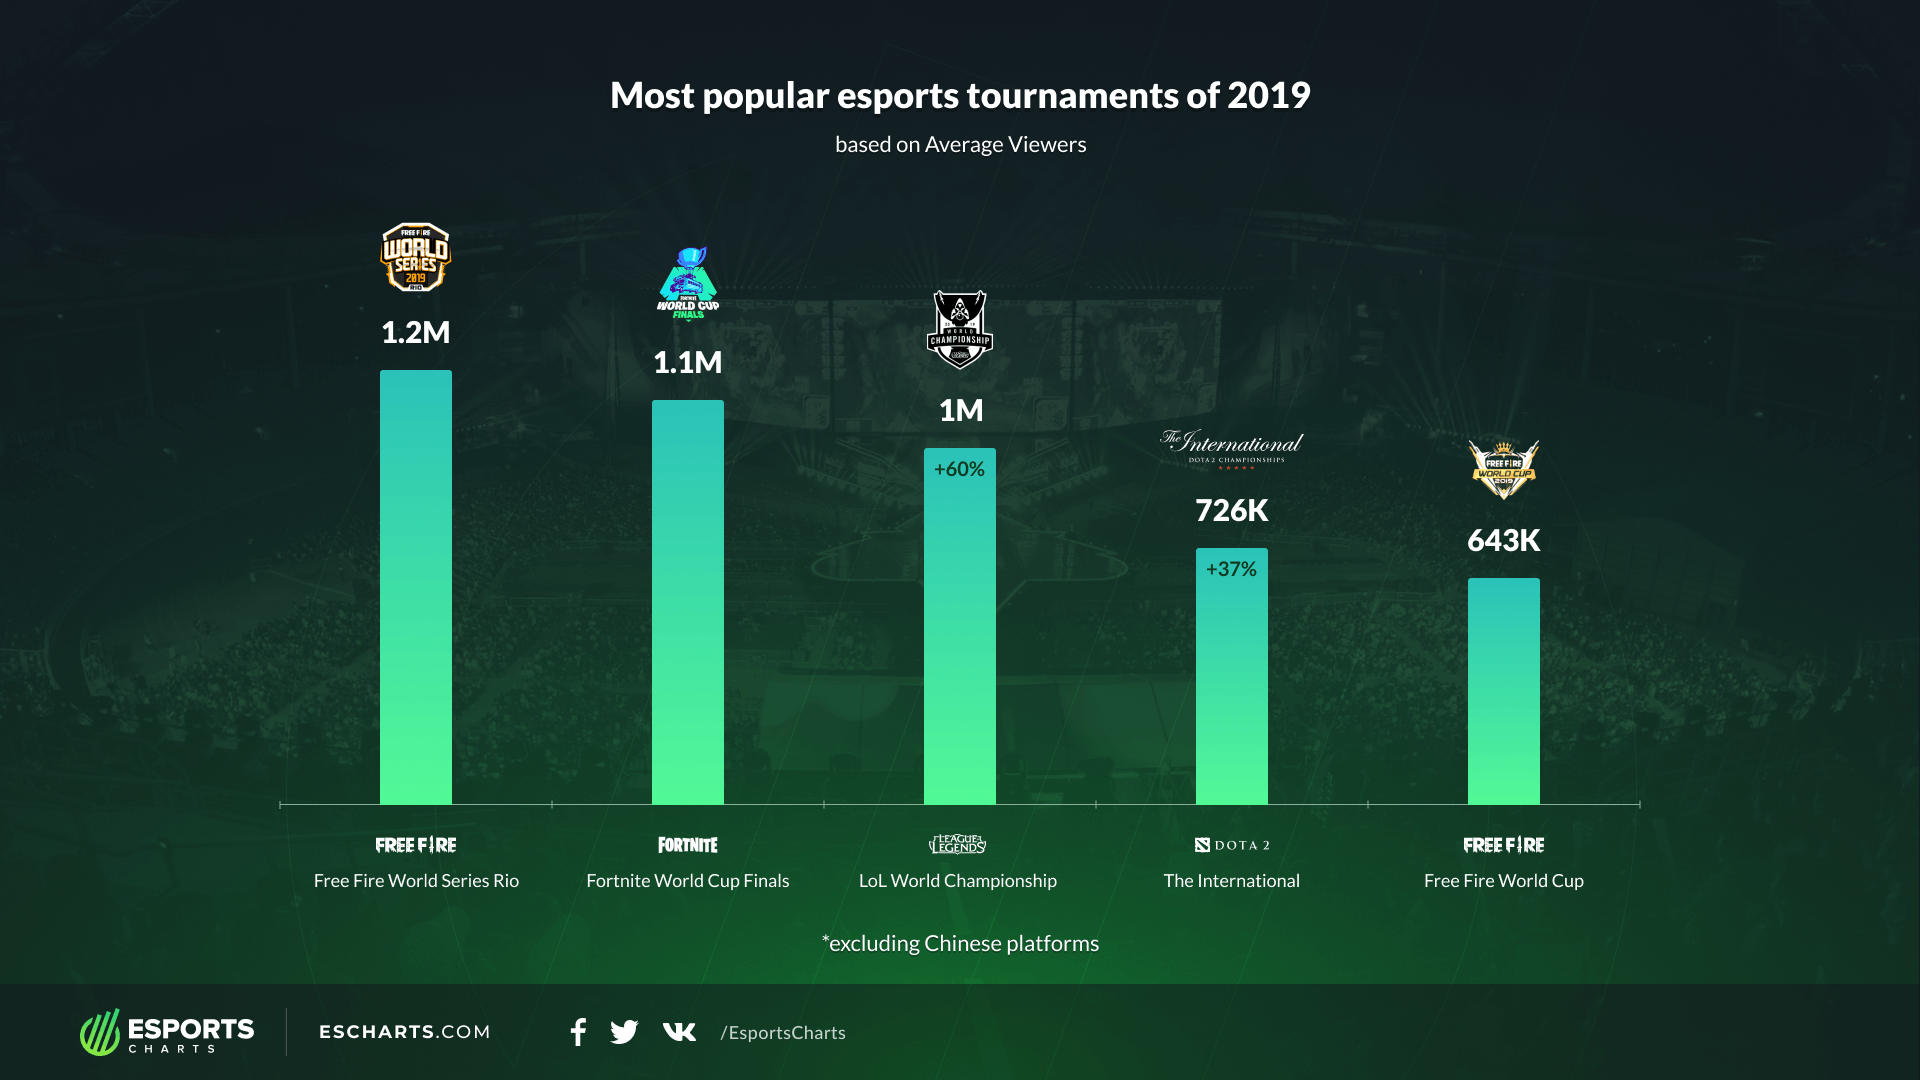 The LoL World Championship was the most popular esports tournament of